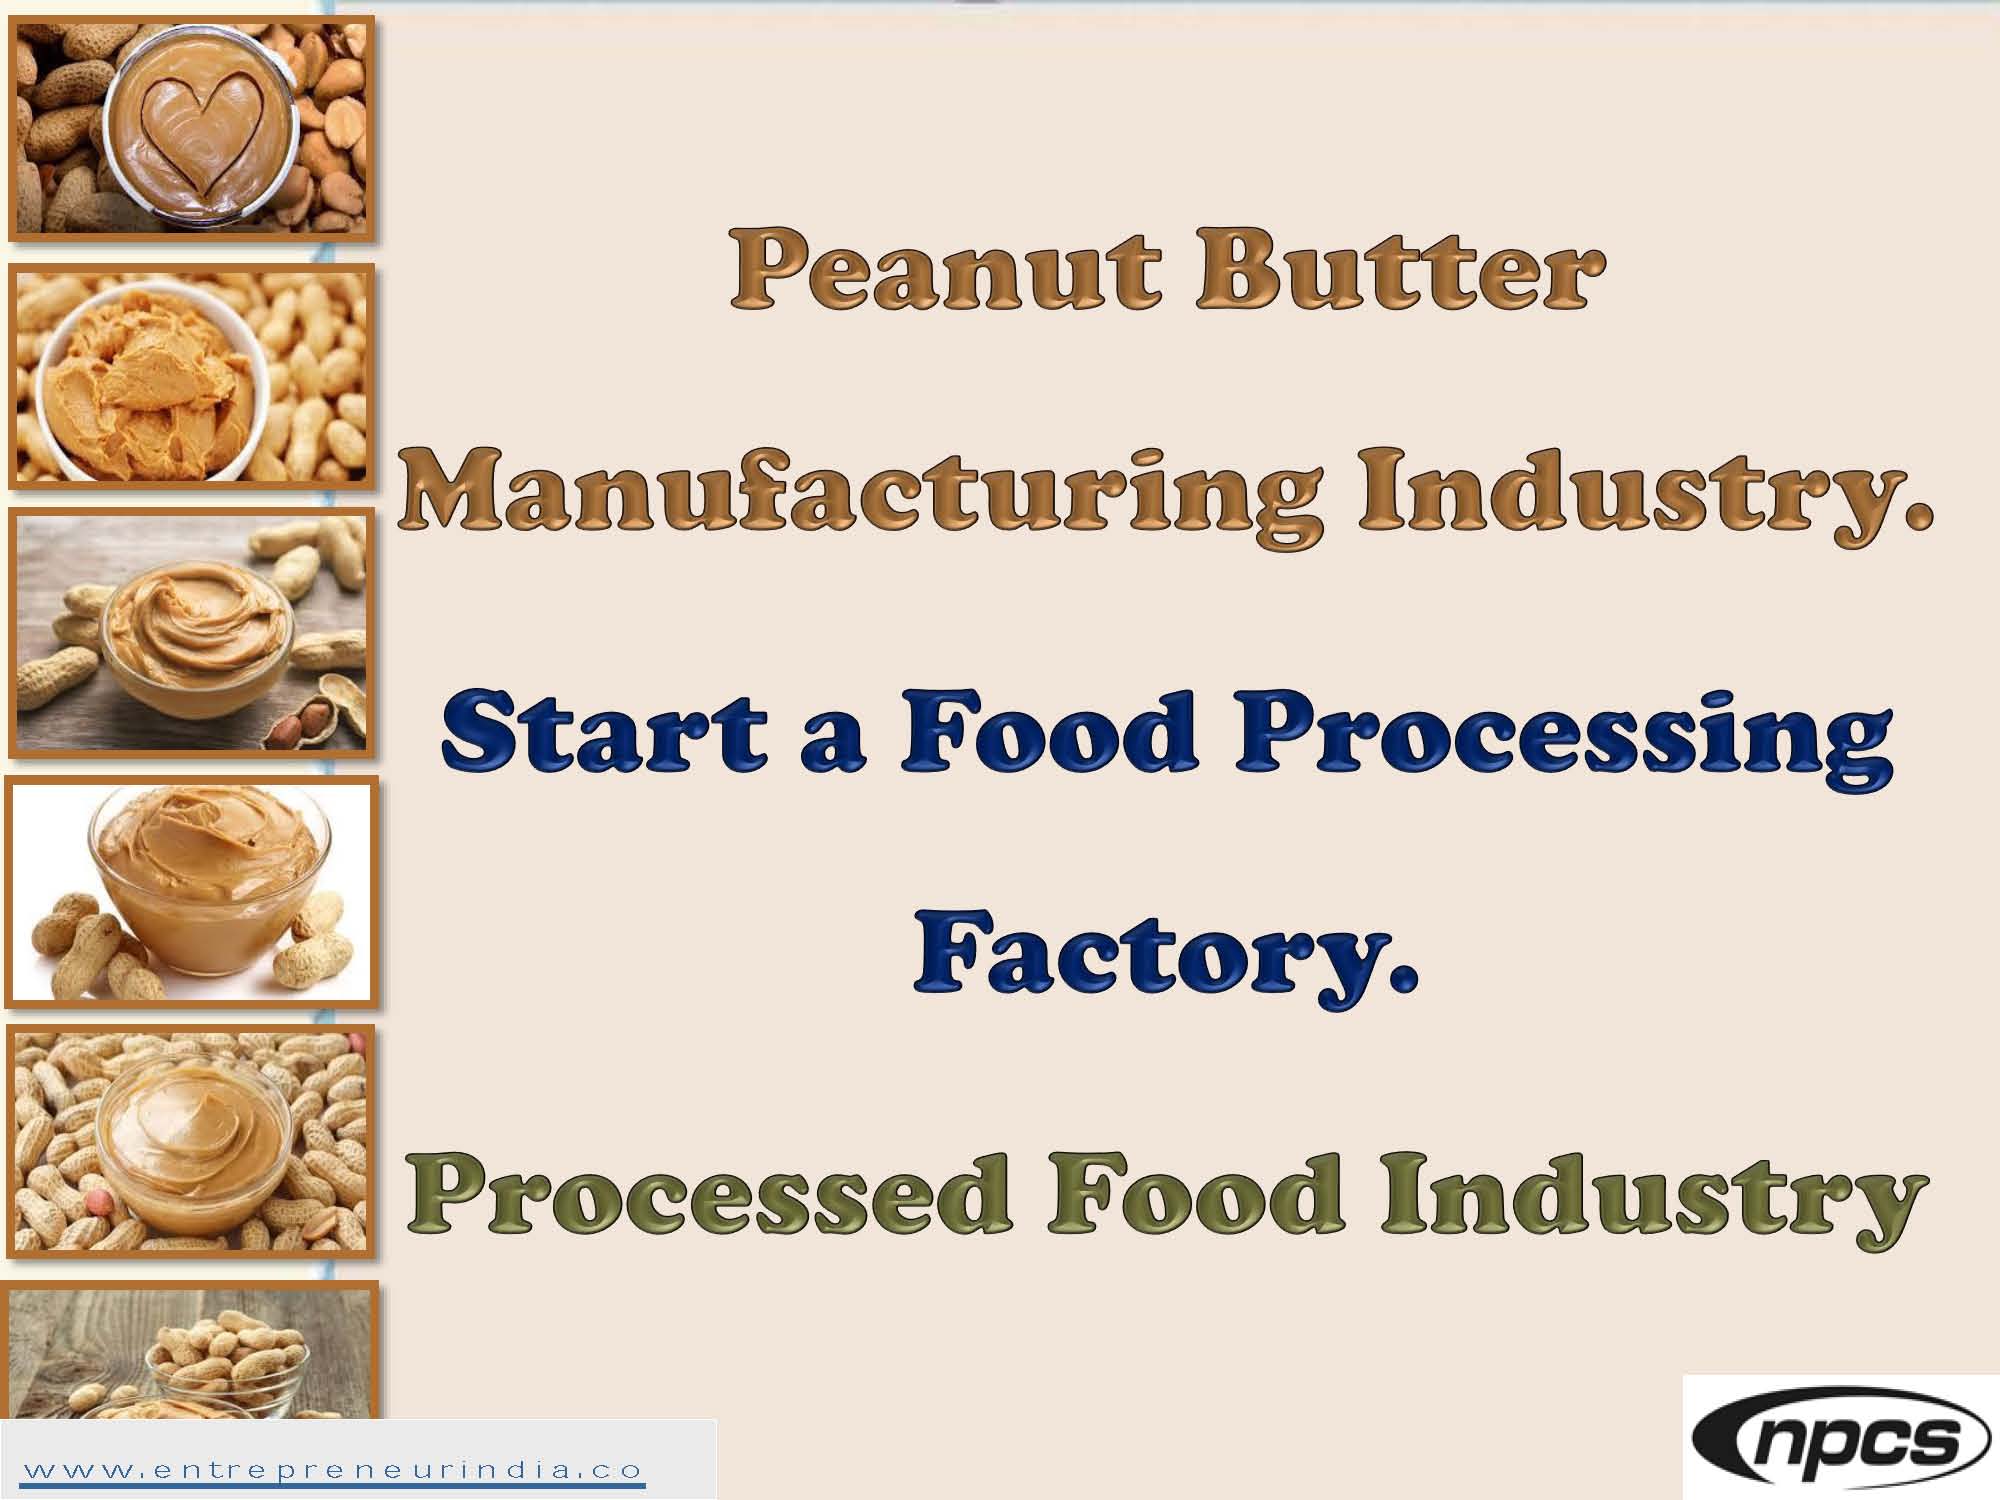 Peanut Butter Manufacturing Industry